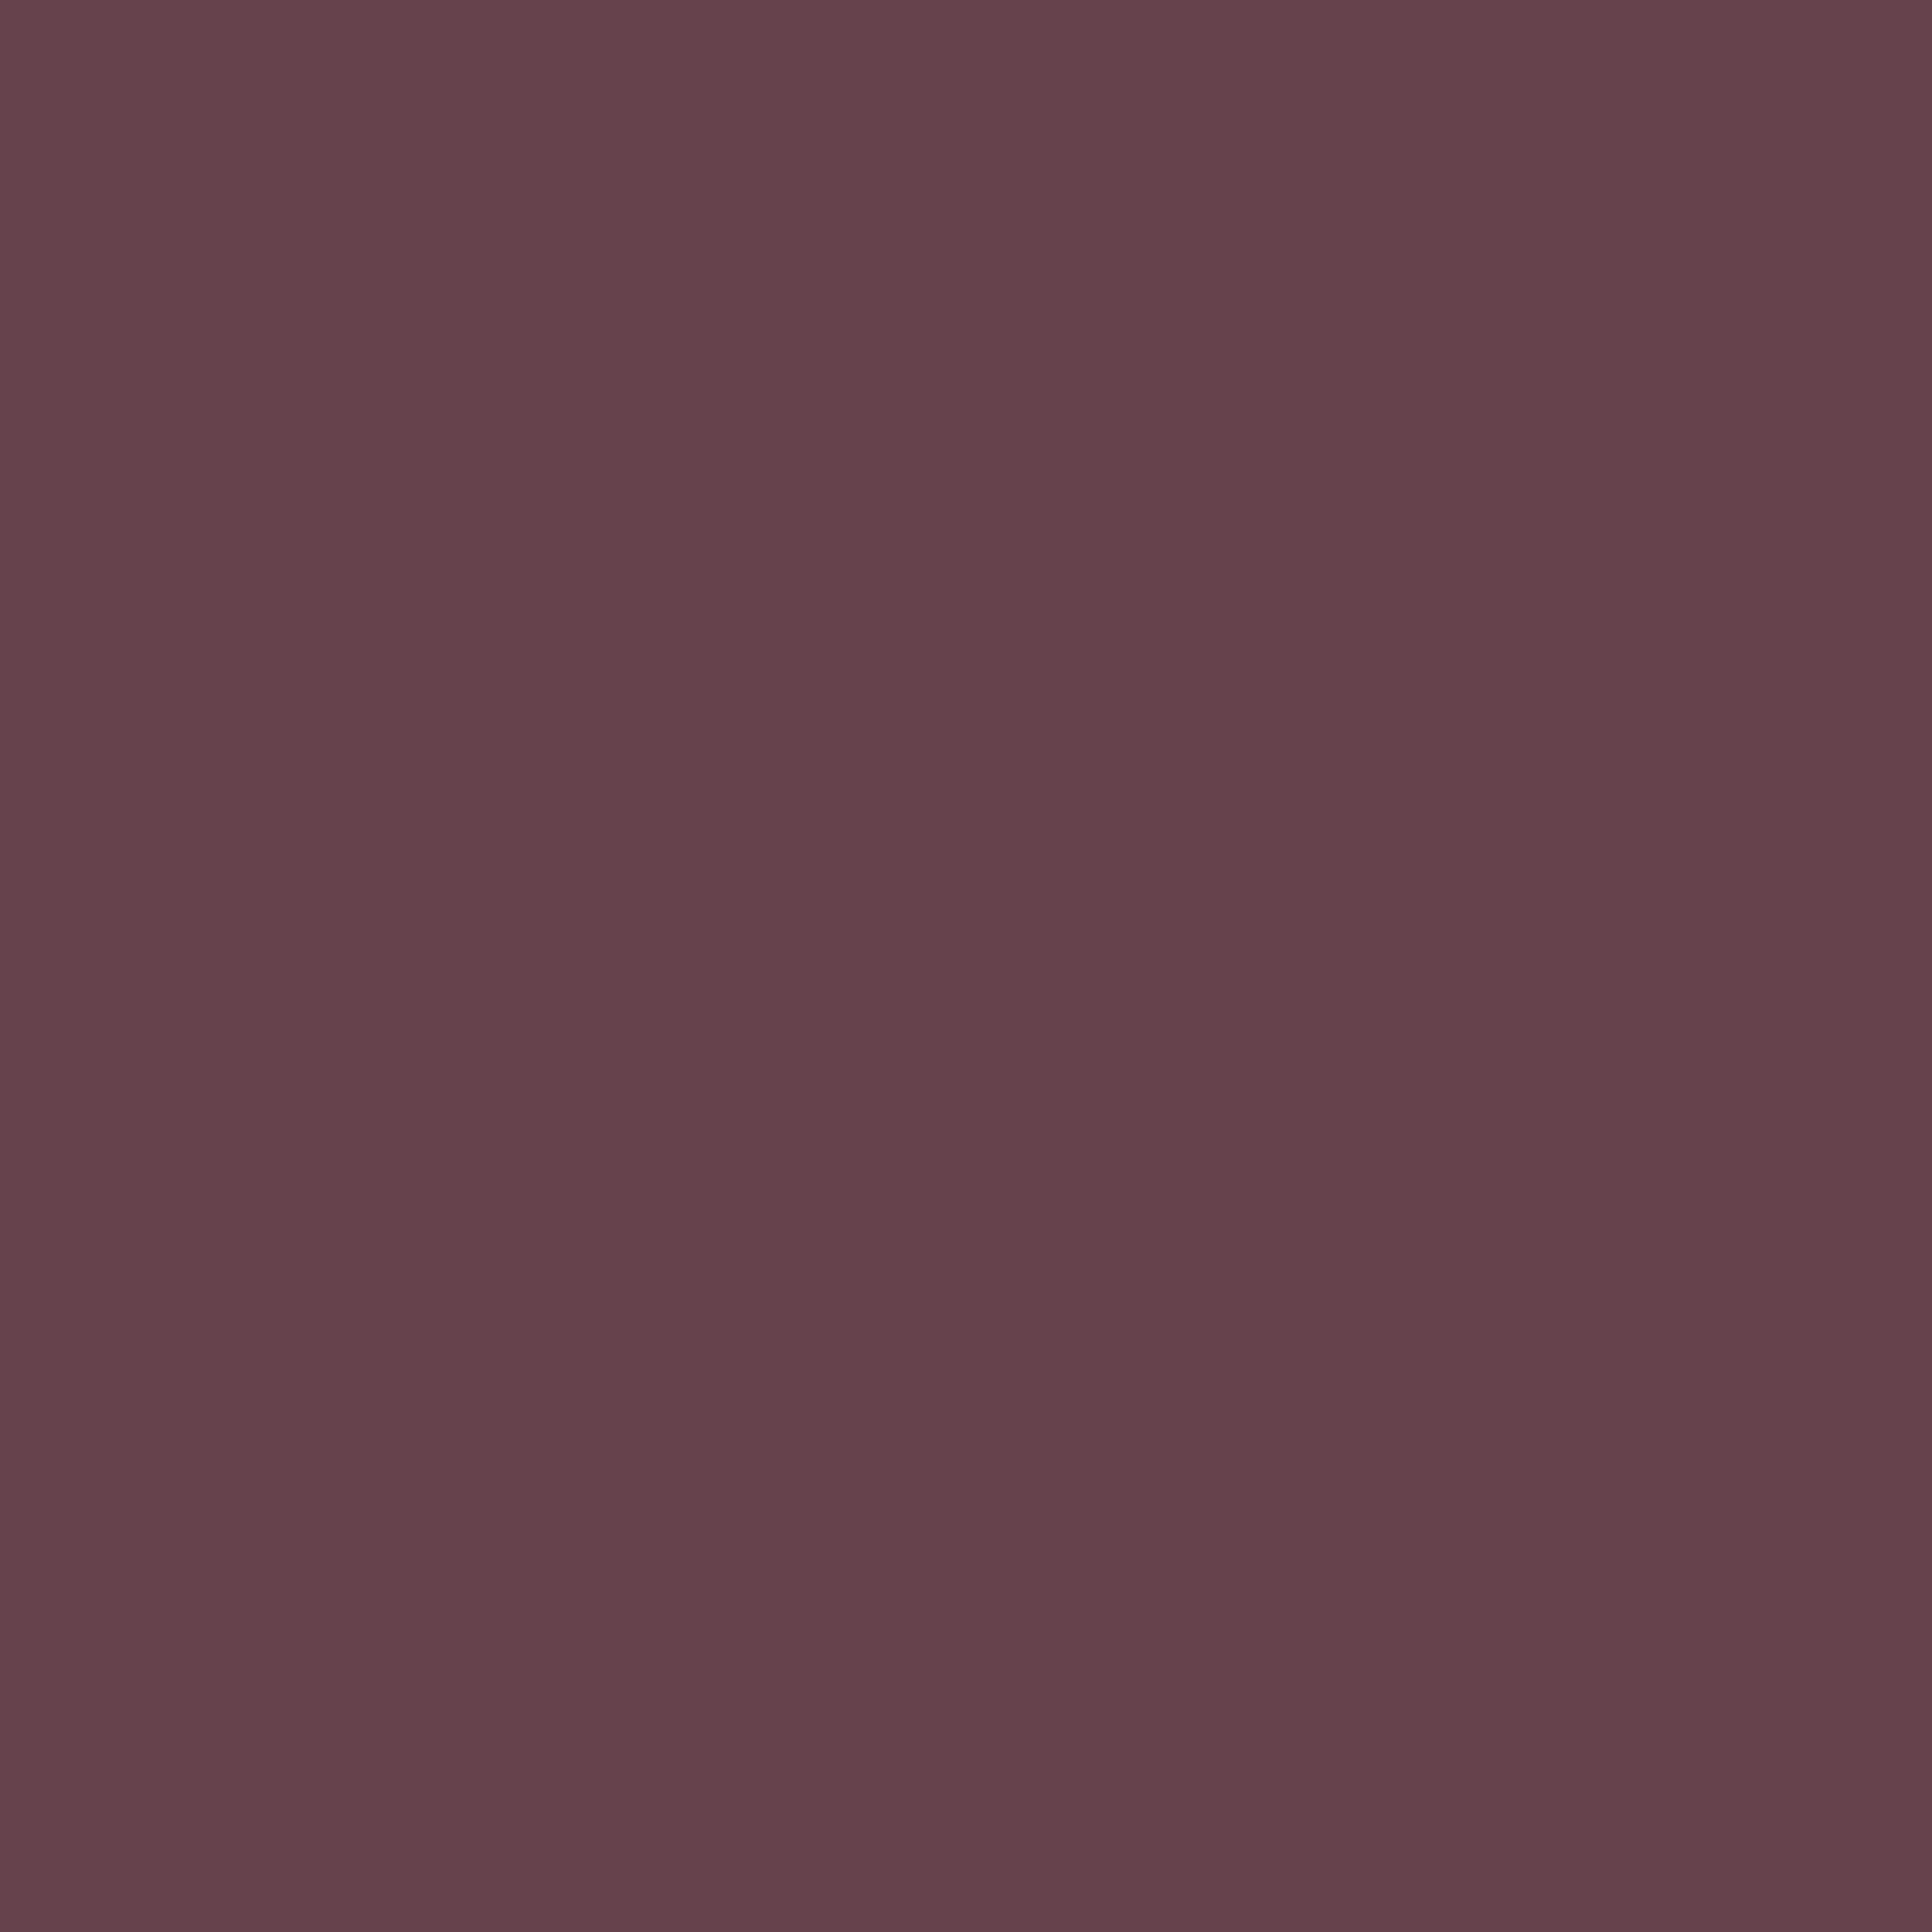 2732x2732 Deep Tuscan Red Solid Color Background